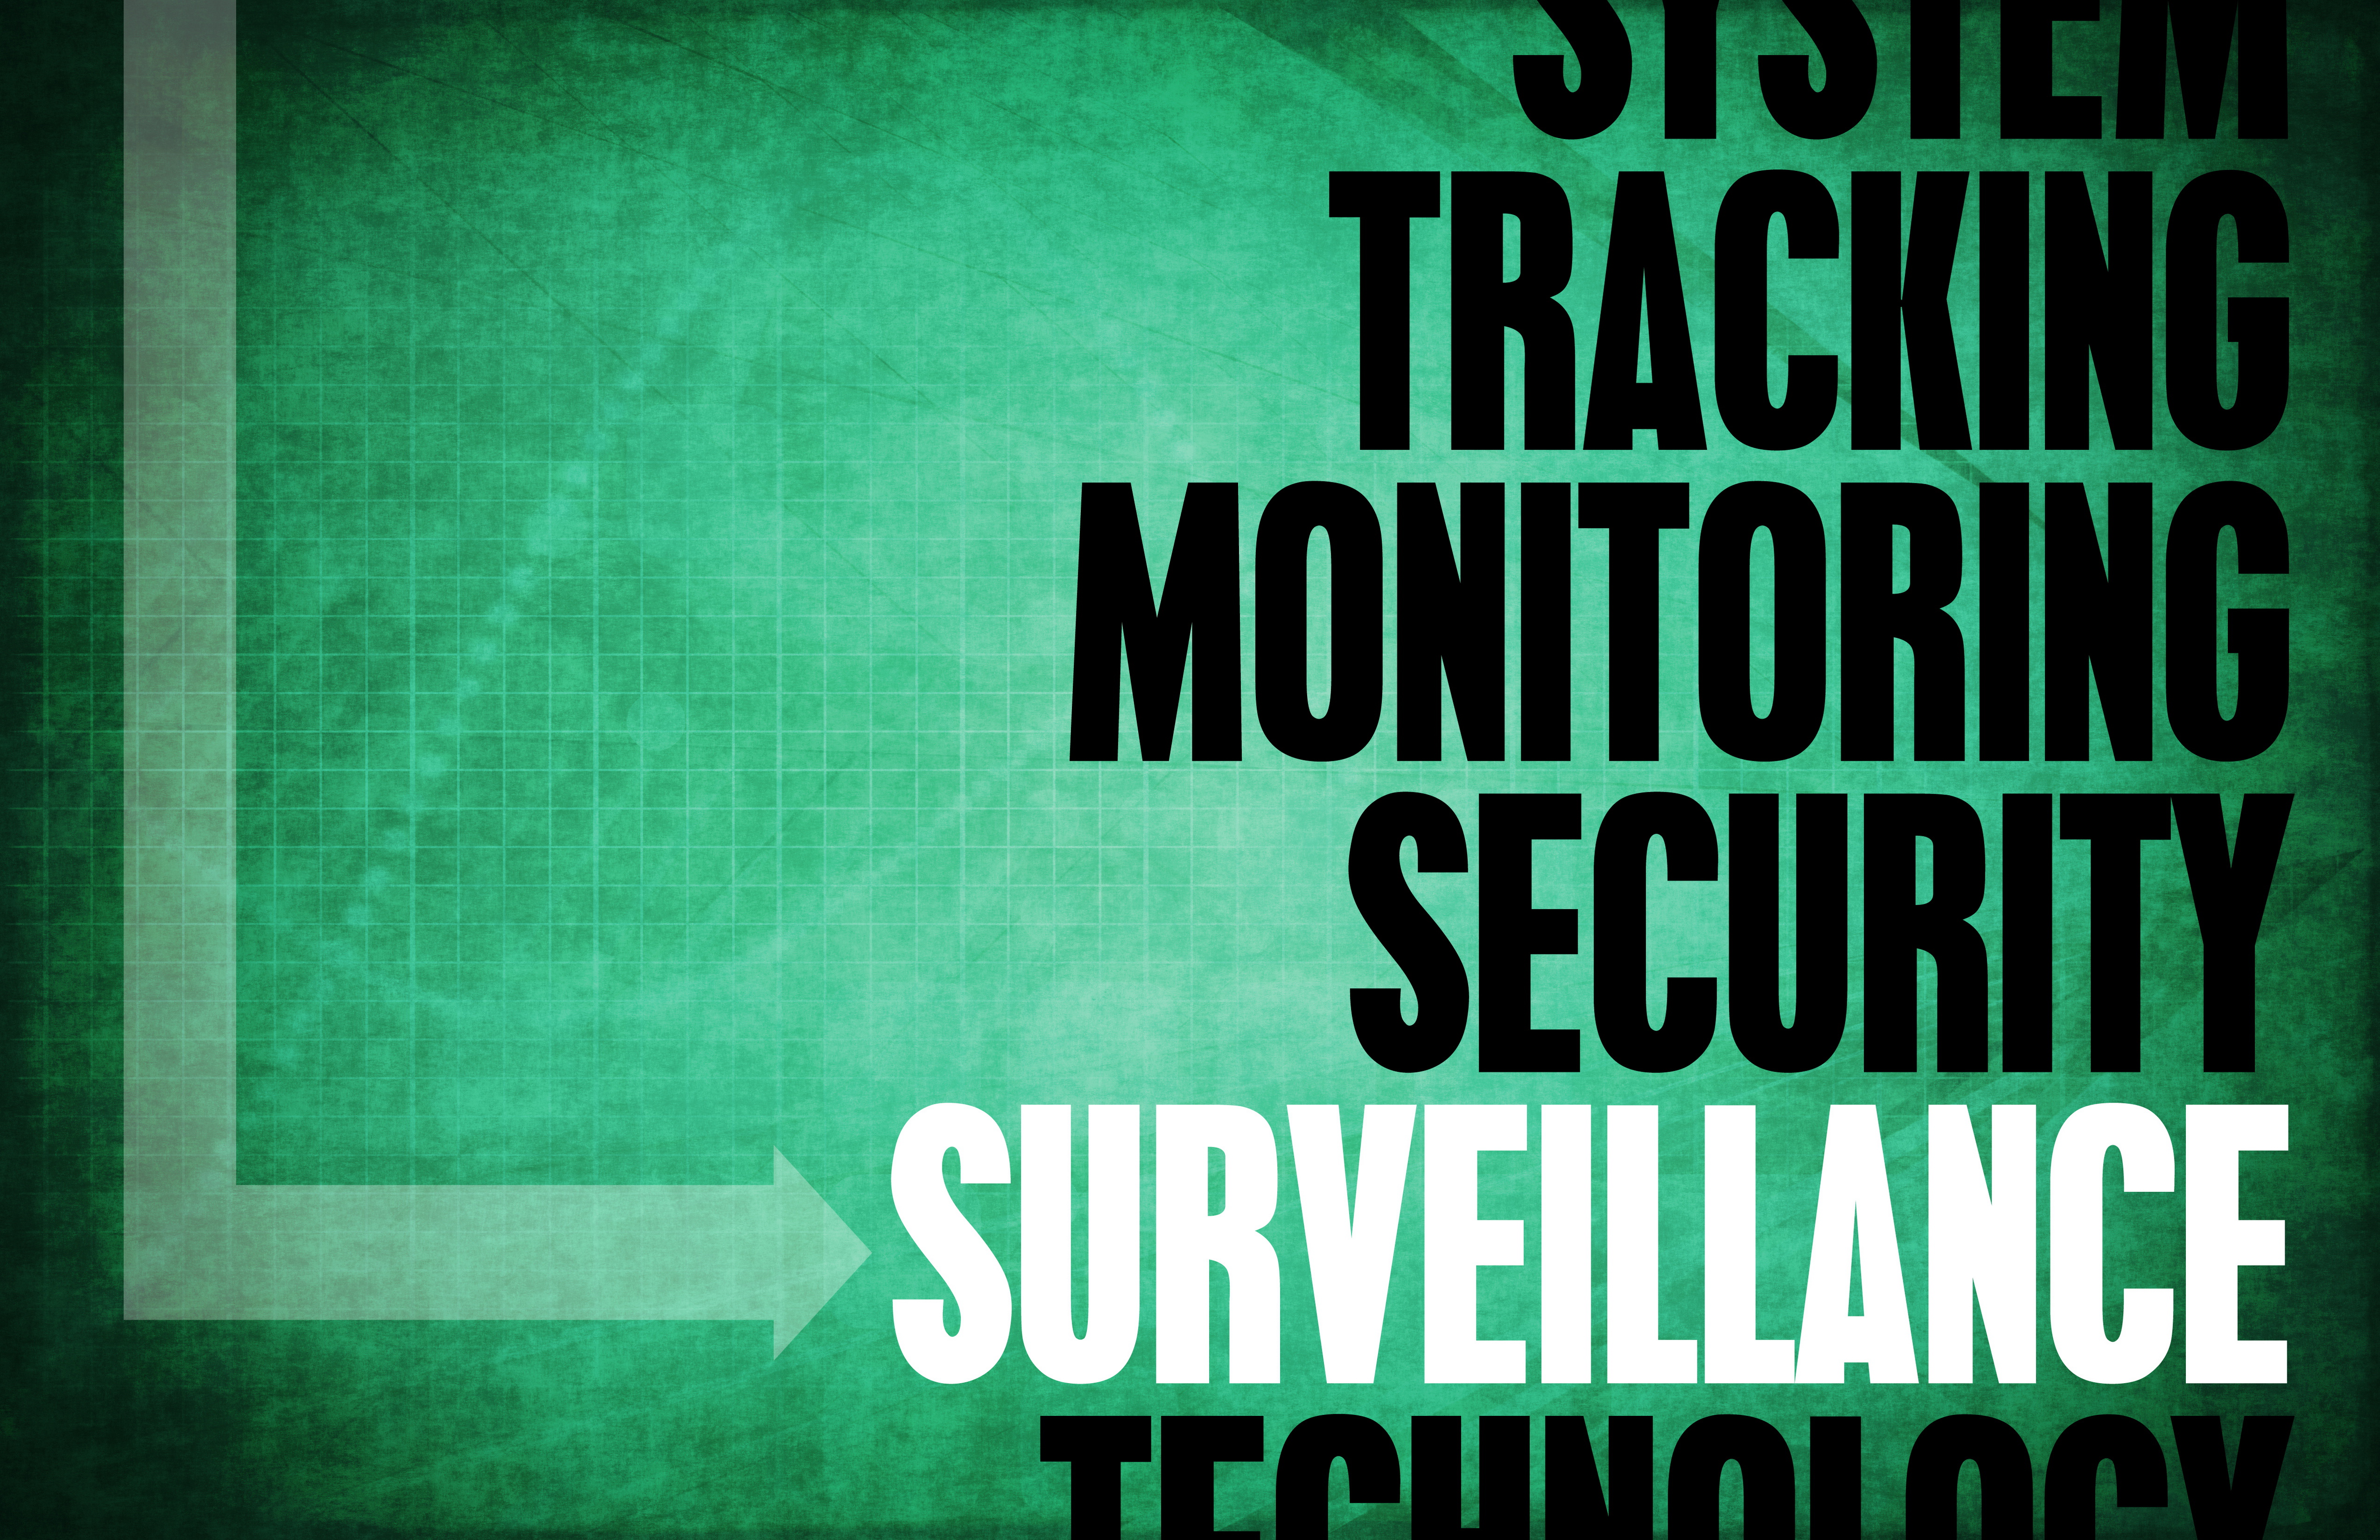 Image showing text surveillance and monitoring and tracking